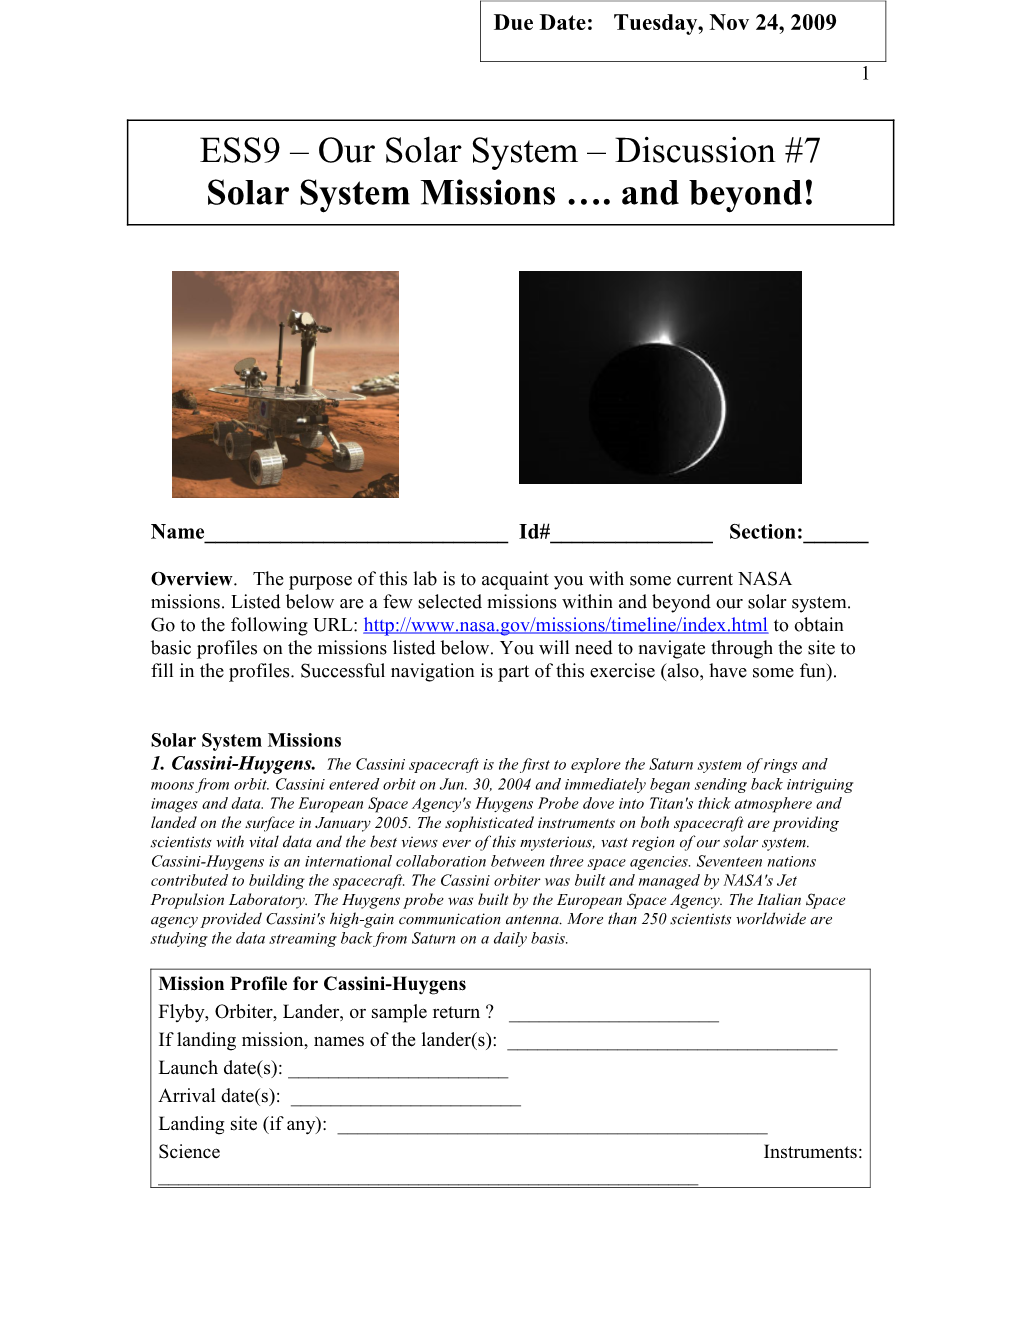 ESS 9 Lab #7: Missions to Space